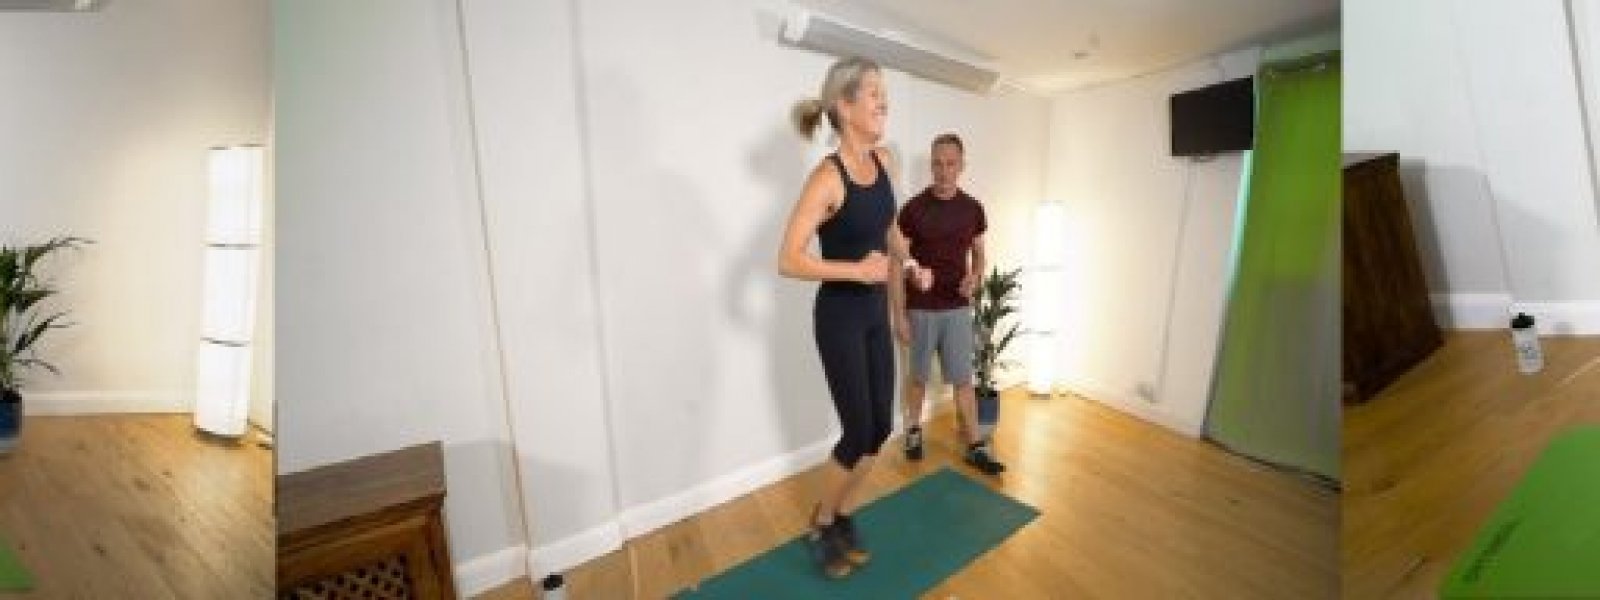 Get SkiFit with yoga and cardio conditioning